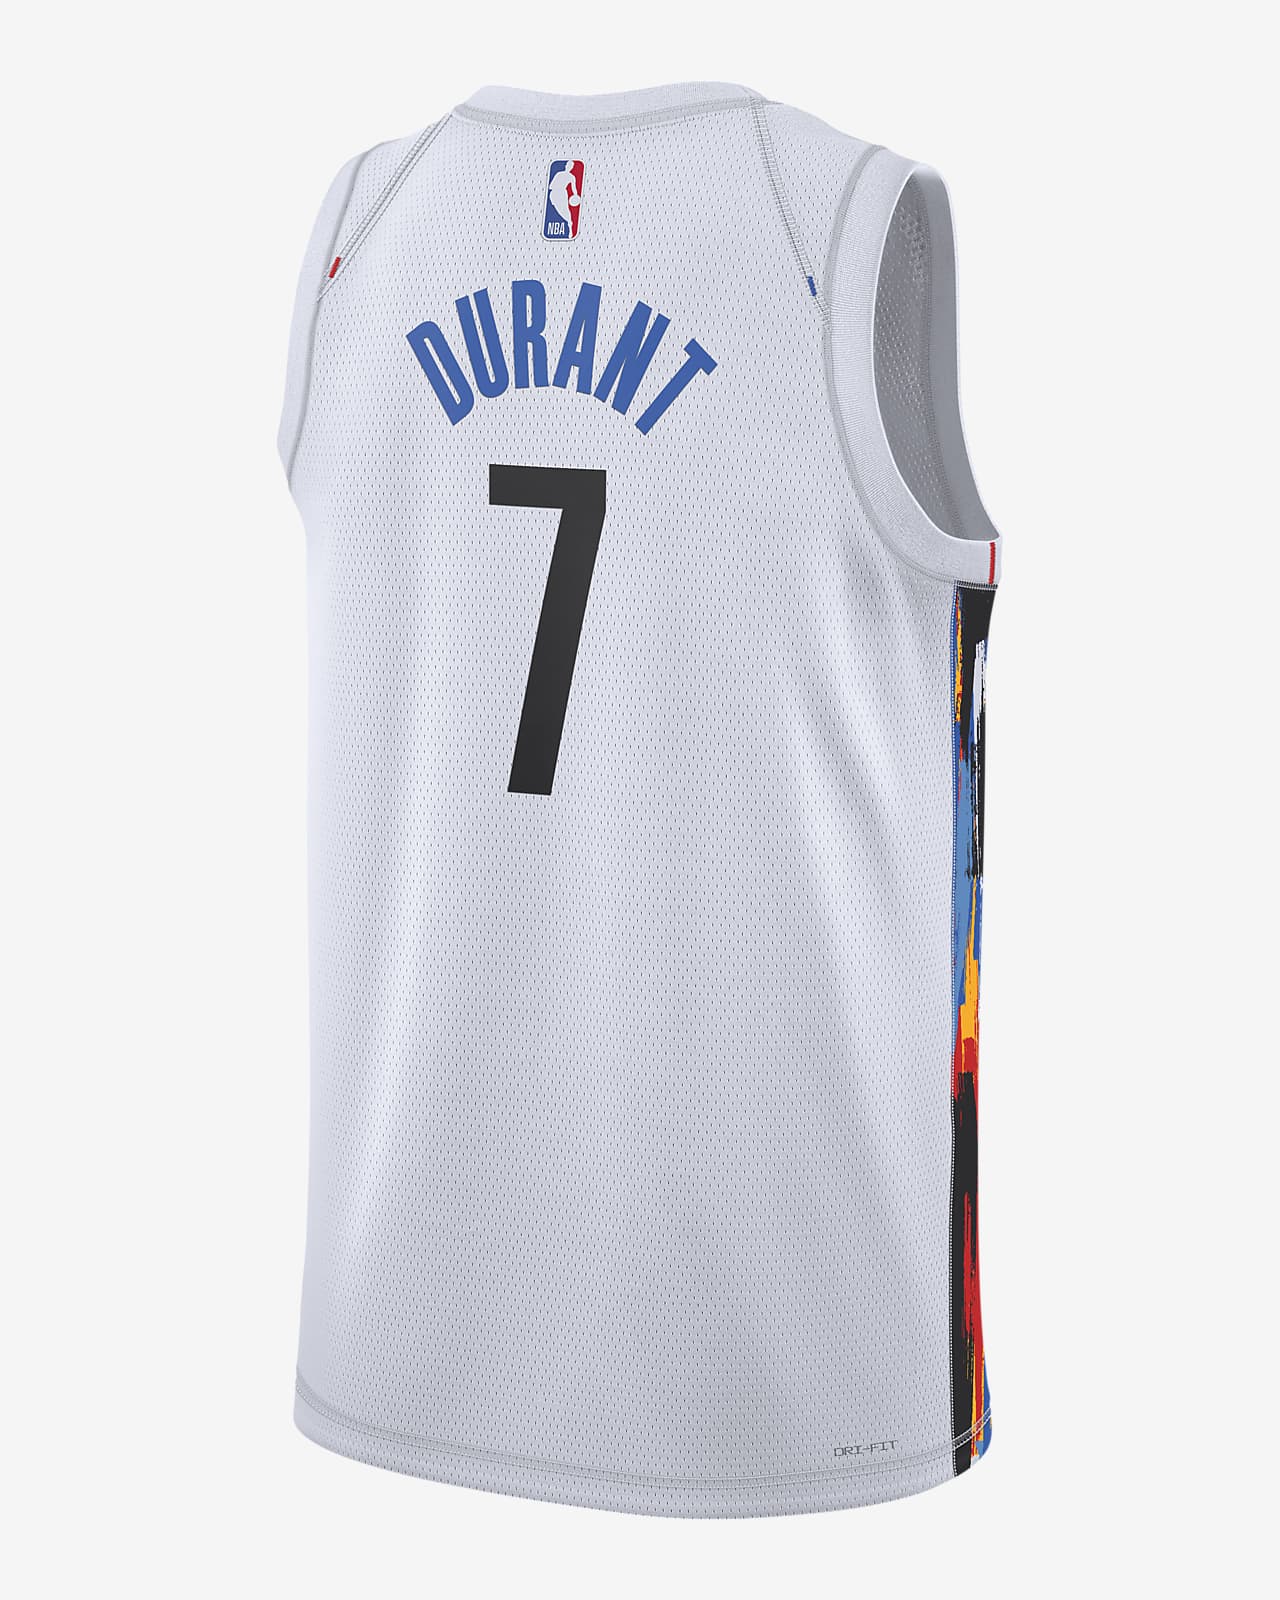 kevin durant retro nets jersey